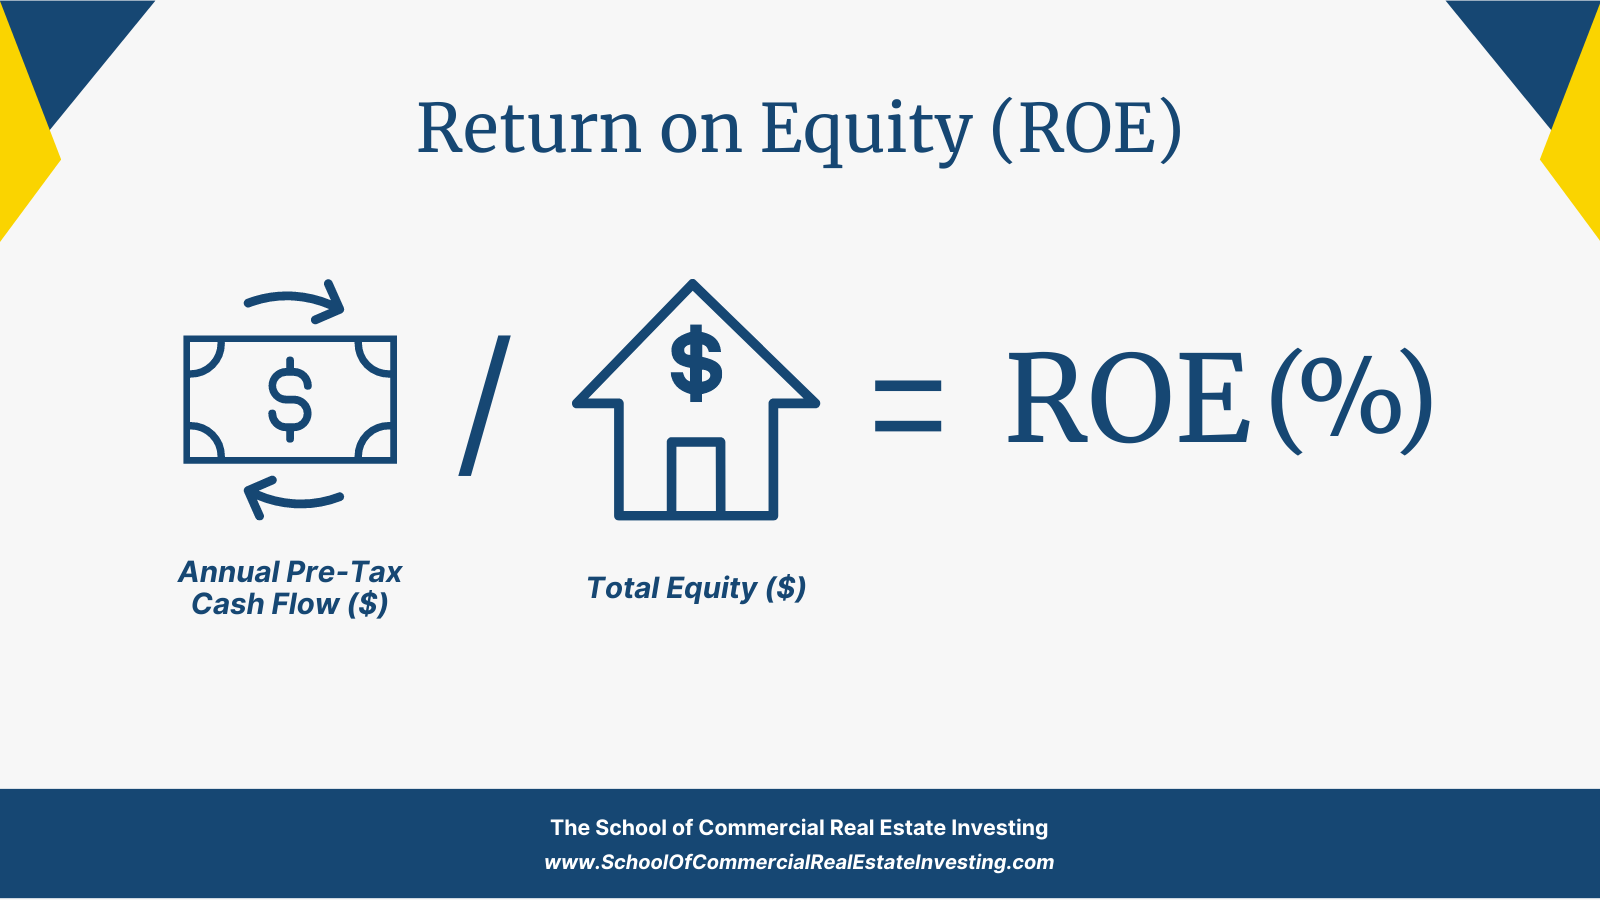 Calculate Return on Equity (ROE) by dividing the Annual Pre-Tax Cash Flow by the Total Equity.